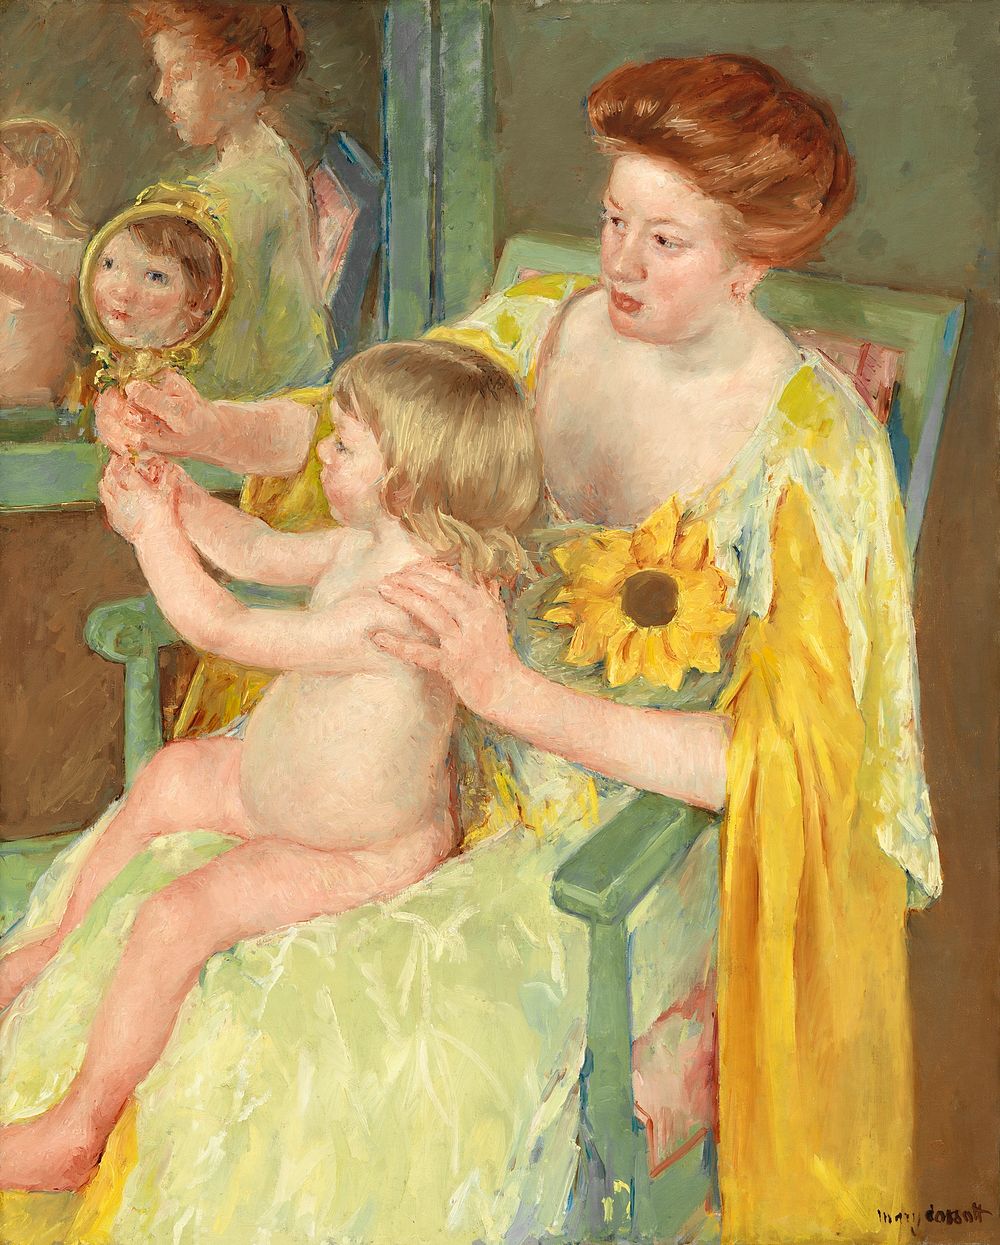 Mother and Child (1905) by Mary Cassatt. Original portrait painting from The National Gallery of Art. Digitally enhanced by…